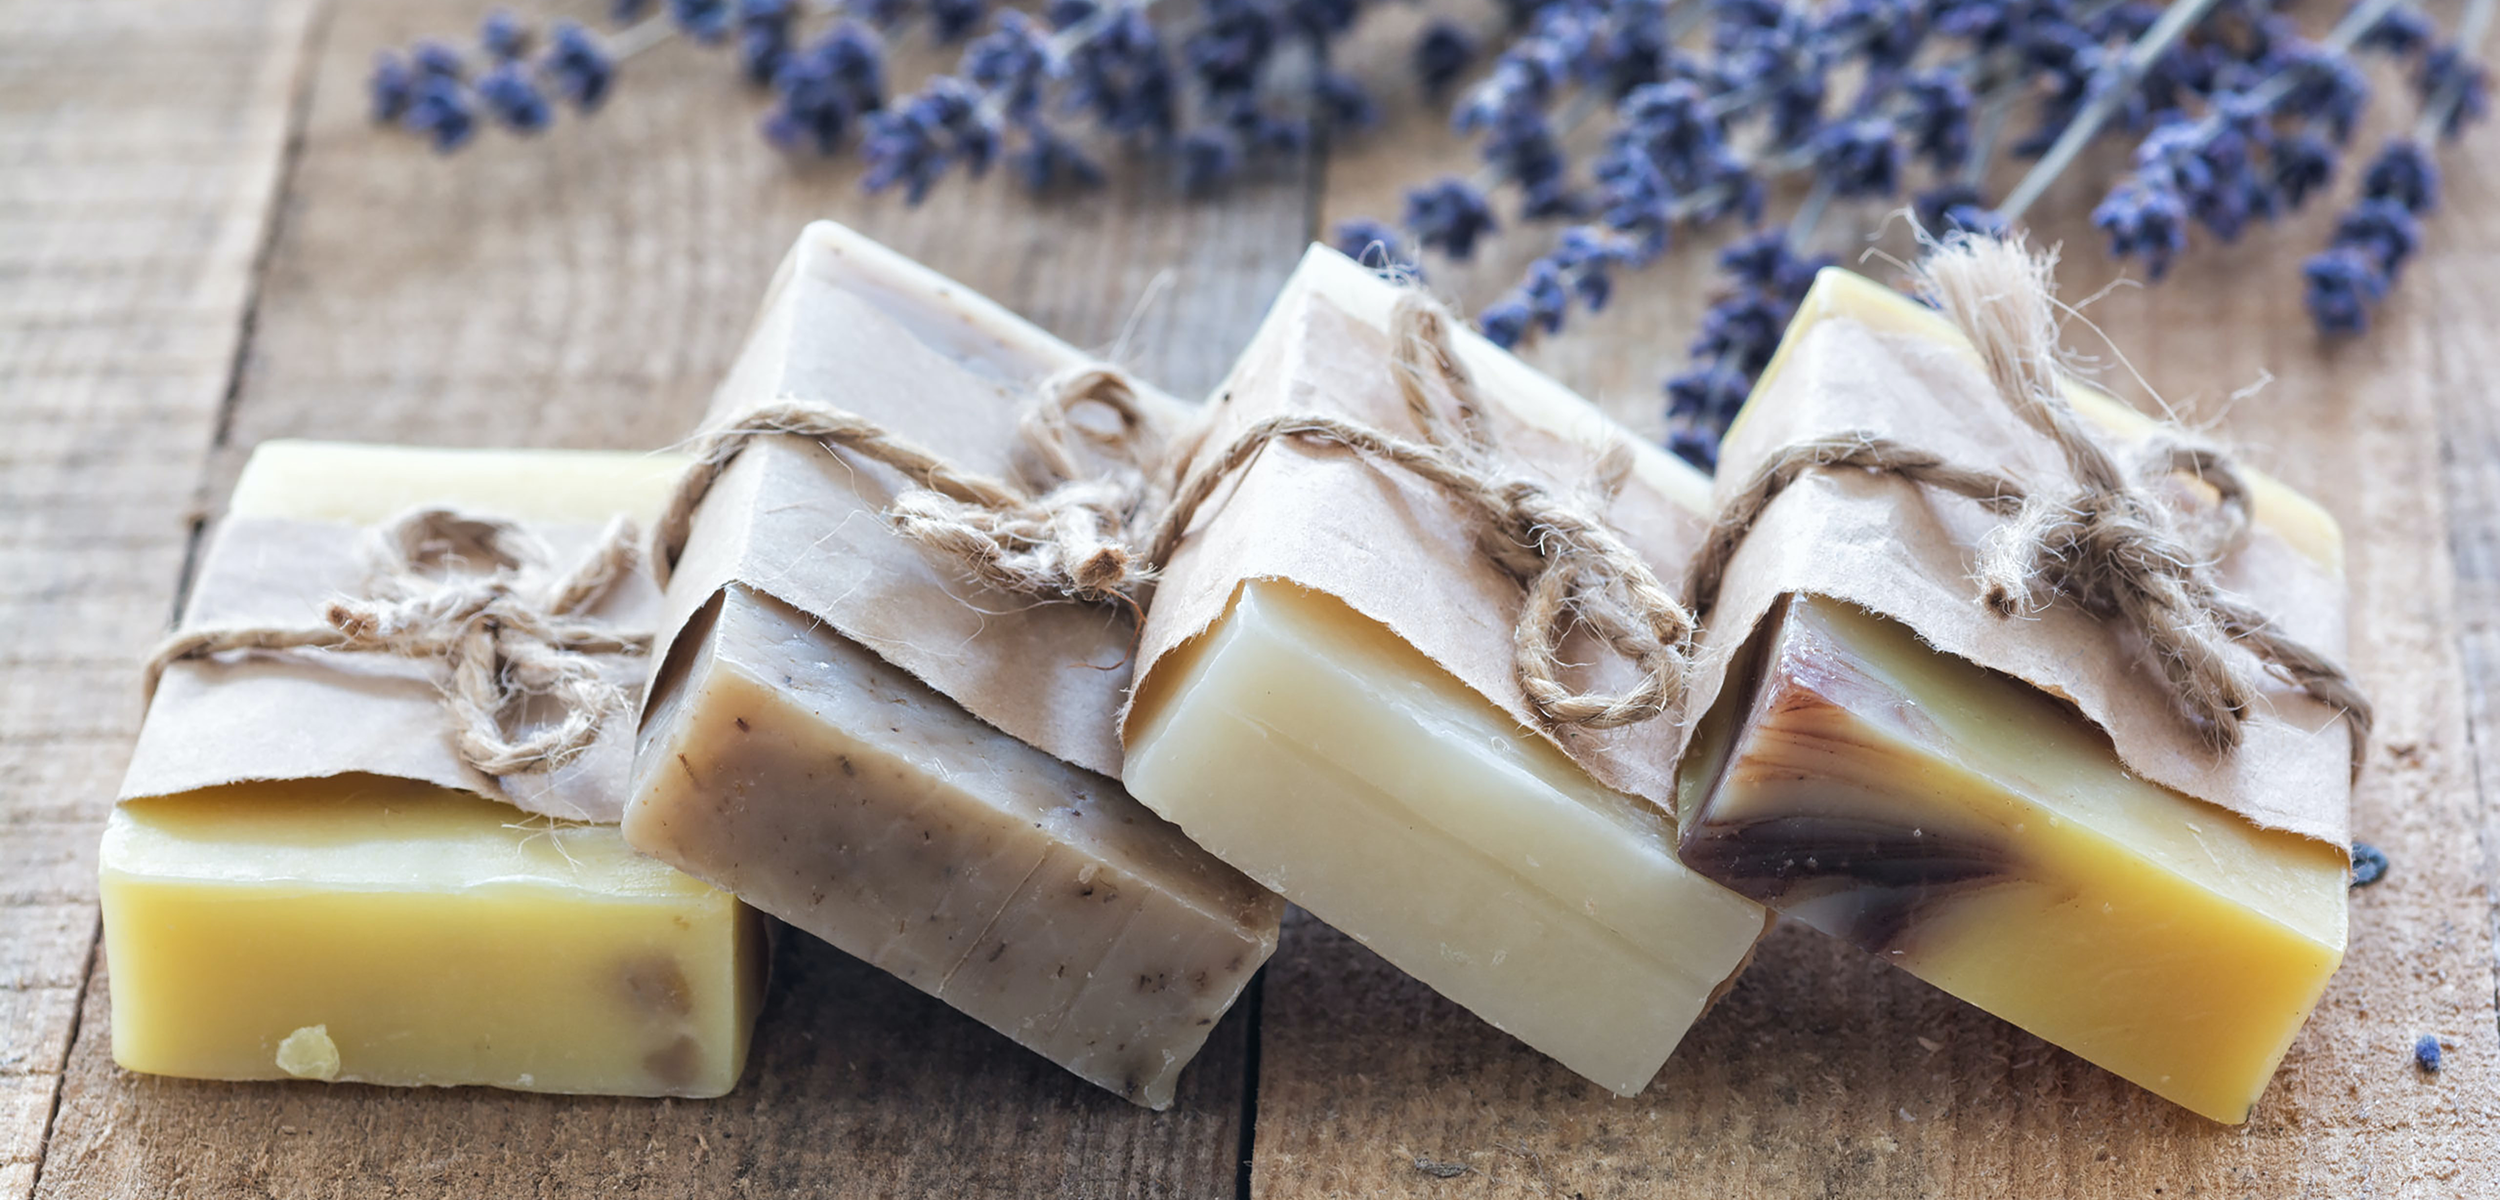 Sustainable Alternatives To Palm Oil In Soap Making - DIY Natural